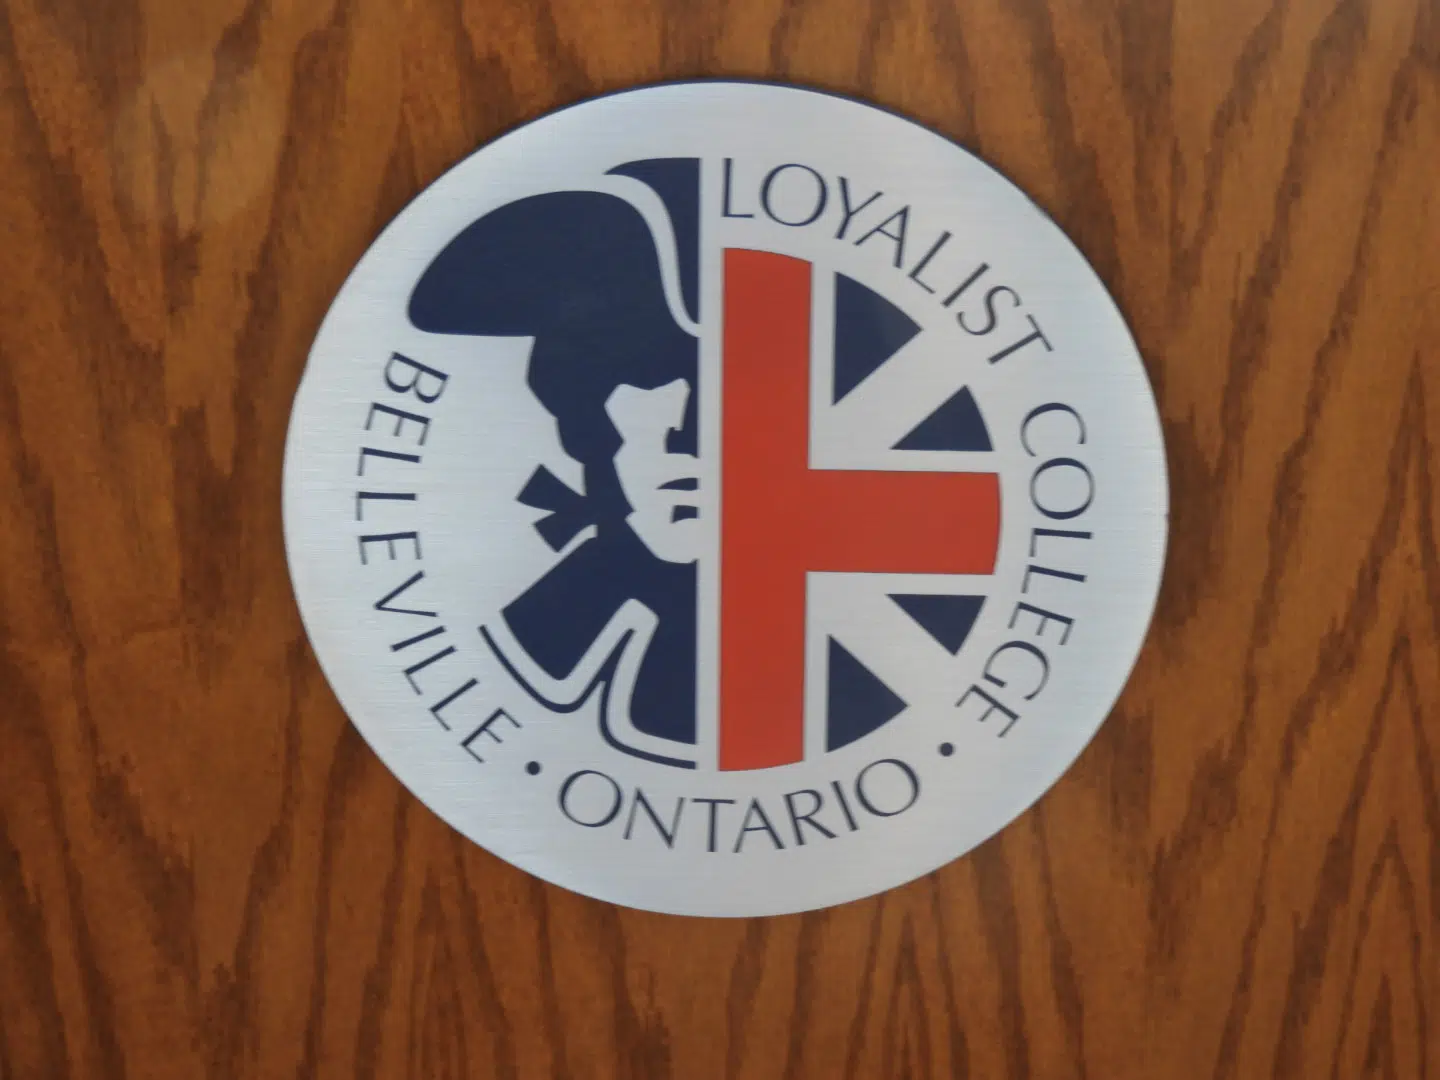 Loyalist College offers children's summer camps